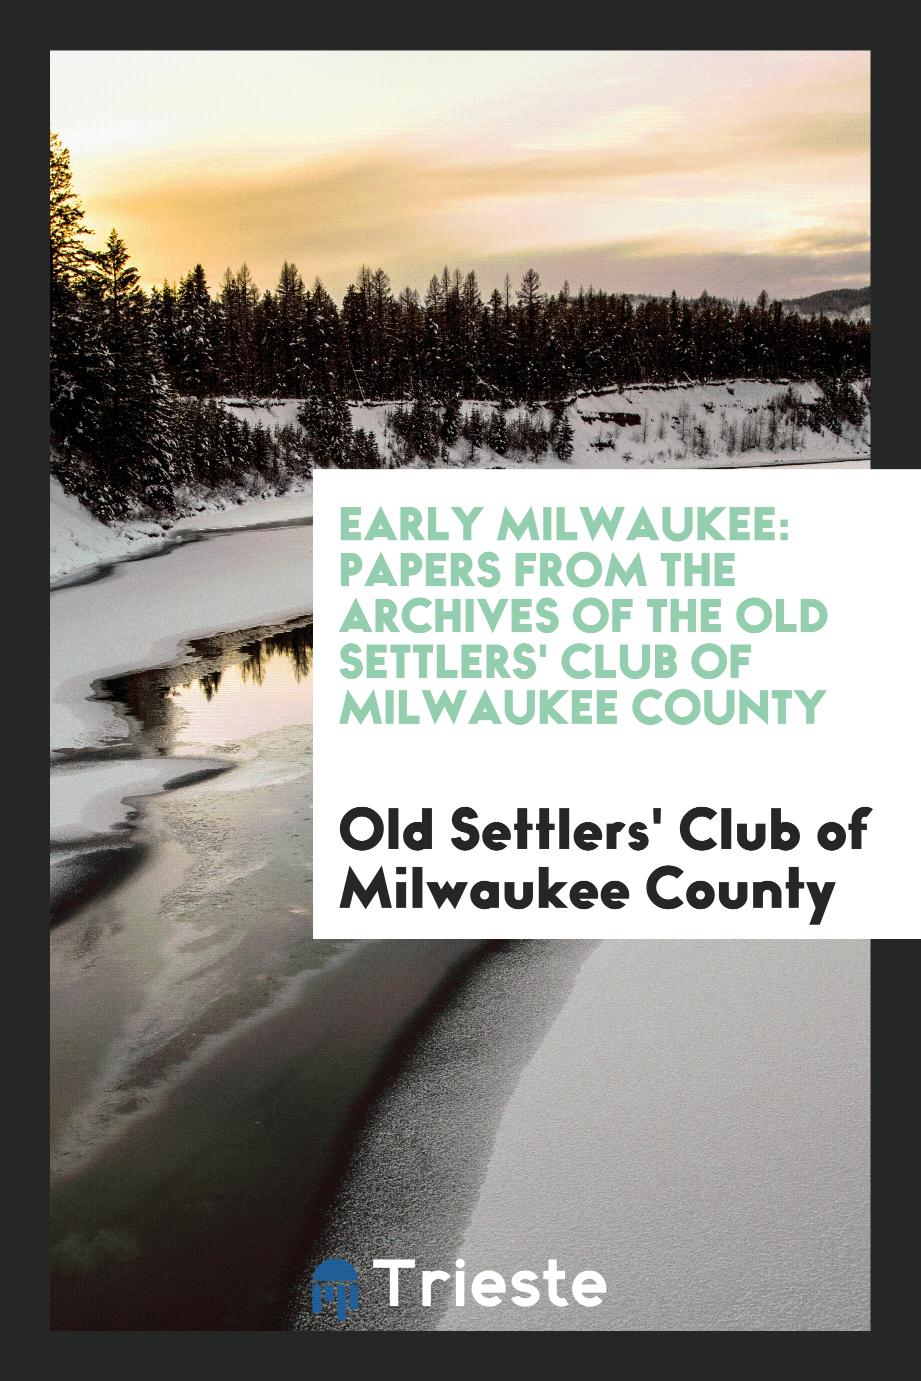 Early Milwaukee: papers from the archives of the Old Settlers' Club of Milwaukee County